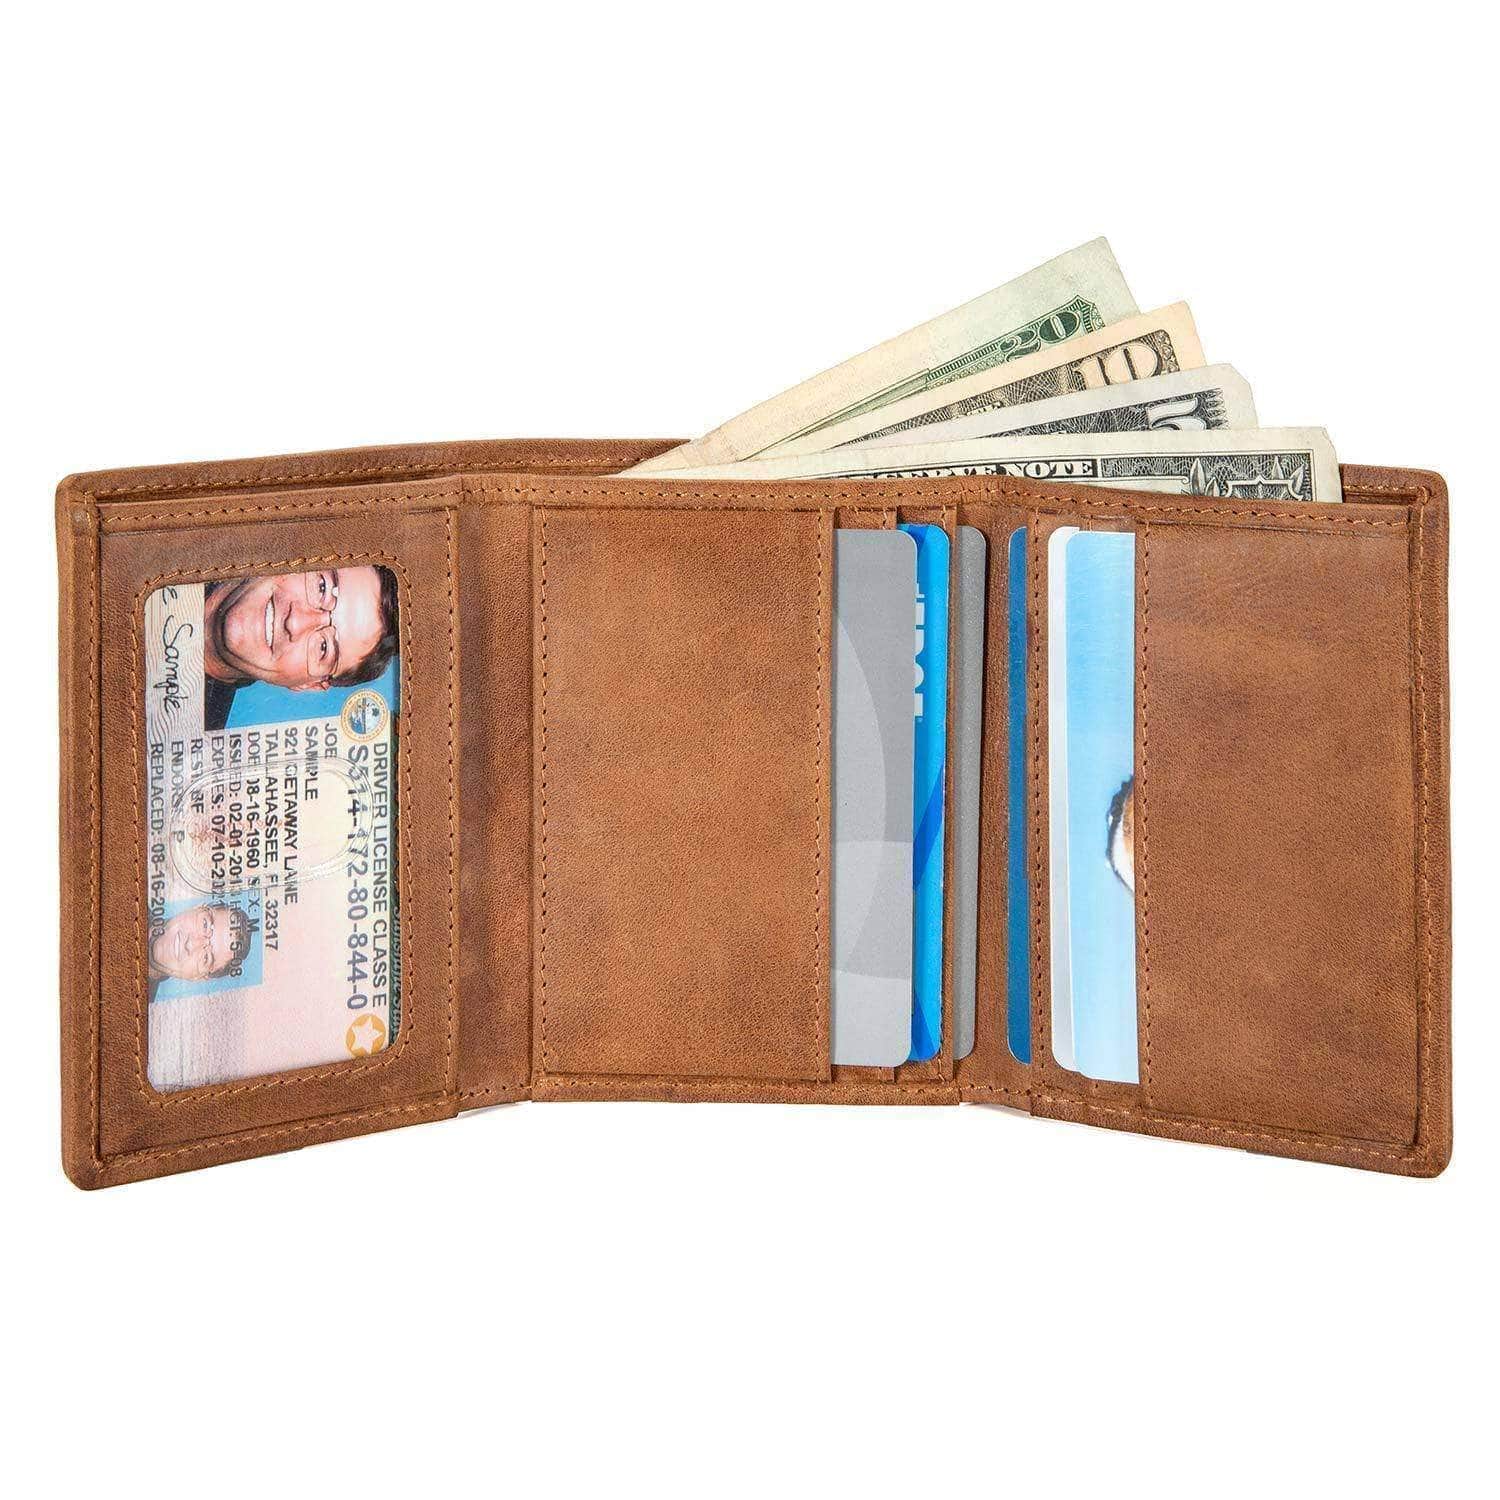 ID Stronghold Men's Wallet Mens Slim RFID Trifold Wallet with ID in Leather and Nylon